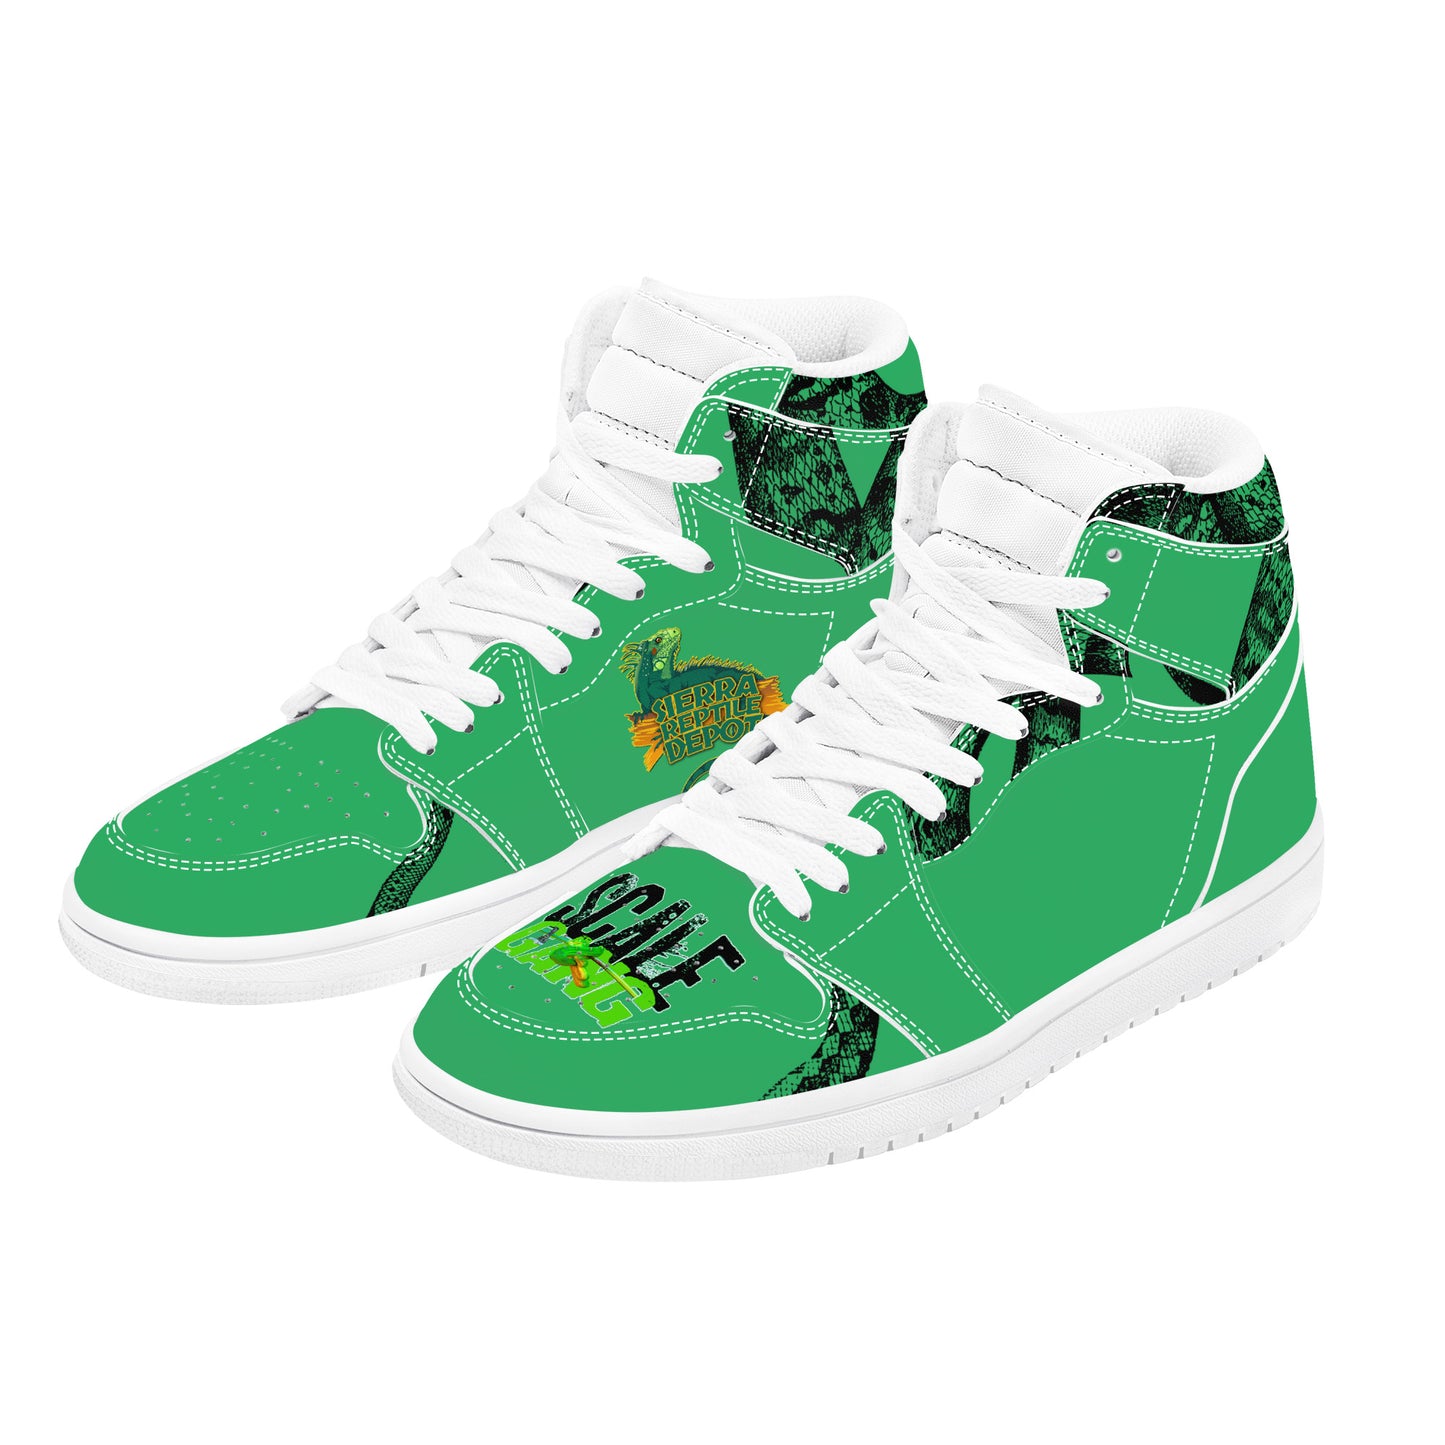 Scale Gang D17 High Top Synthetic Leather Sneaker